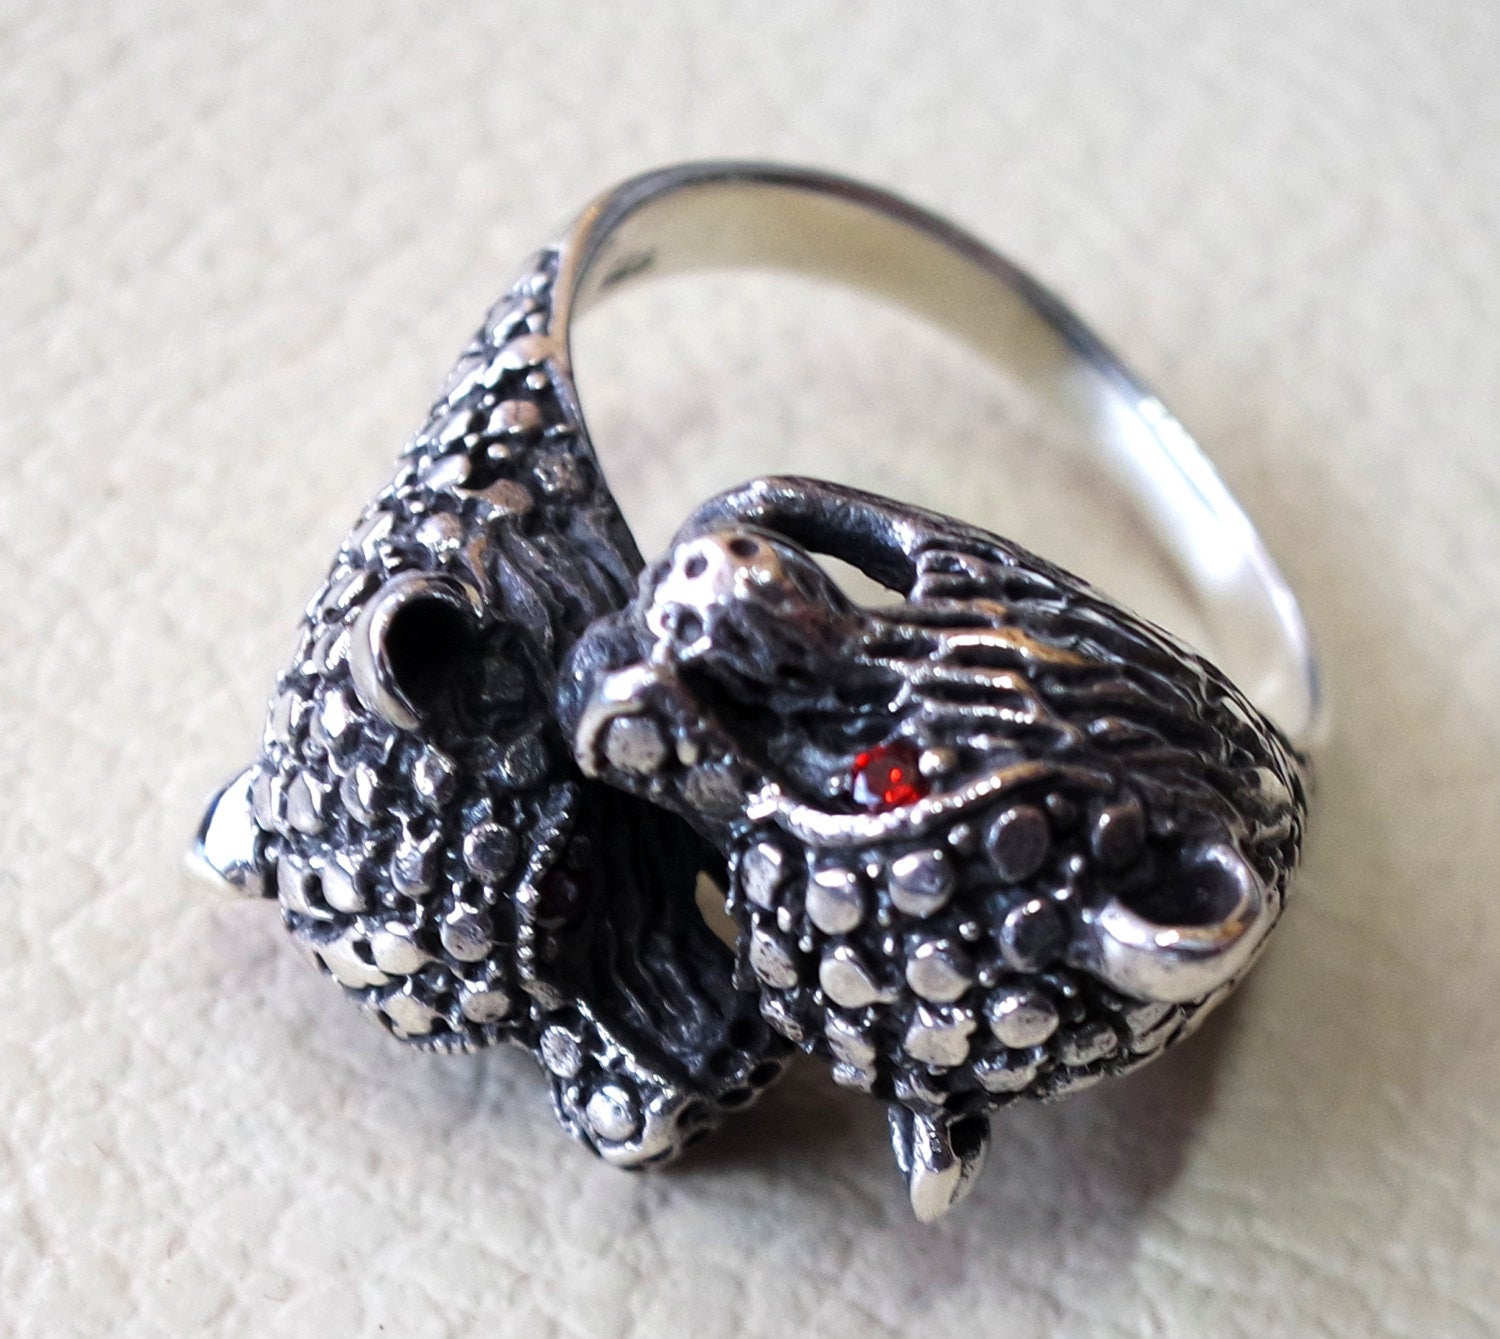 Two headed tiger panther heavy sterling silver 925 man biker ring all sizes handmade animal jewelry free red ruby eyes craftsmanship